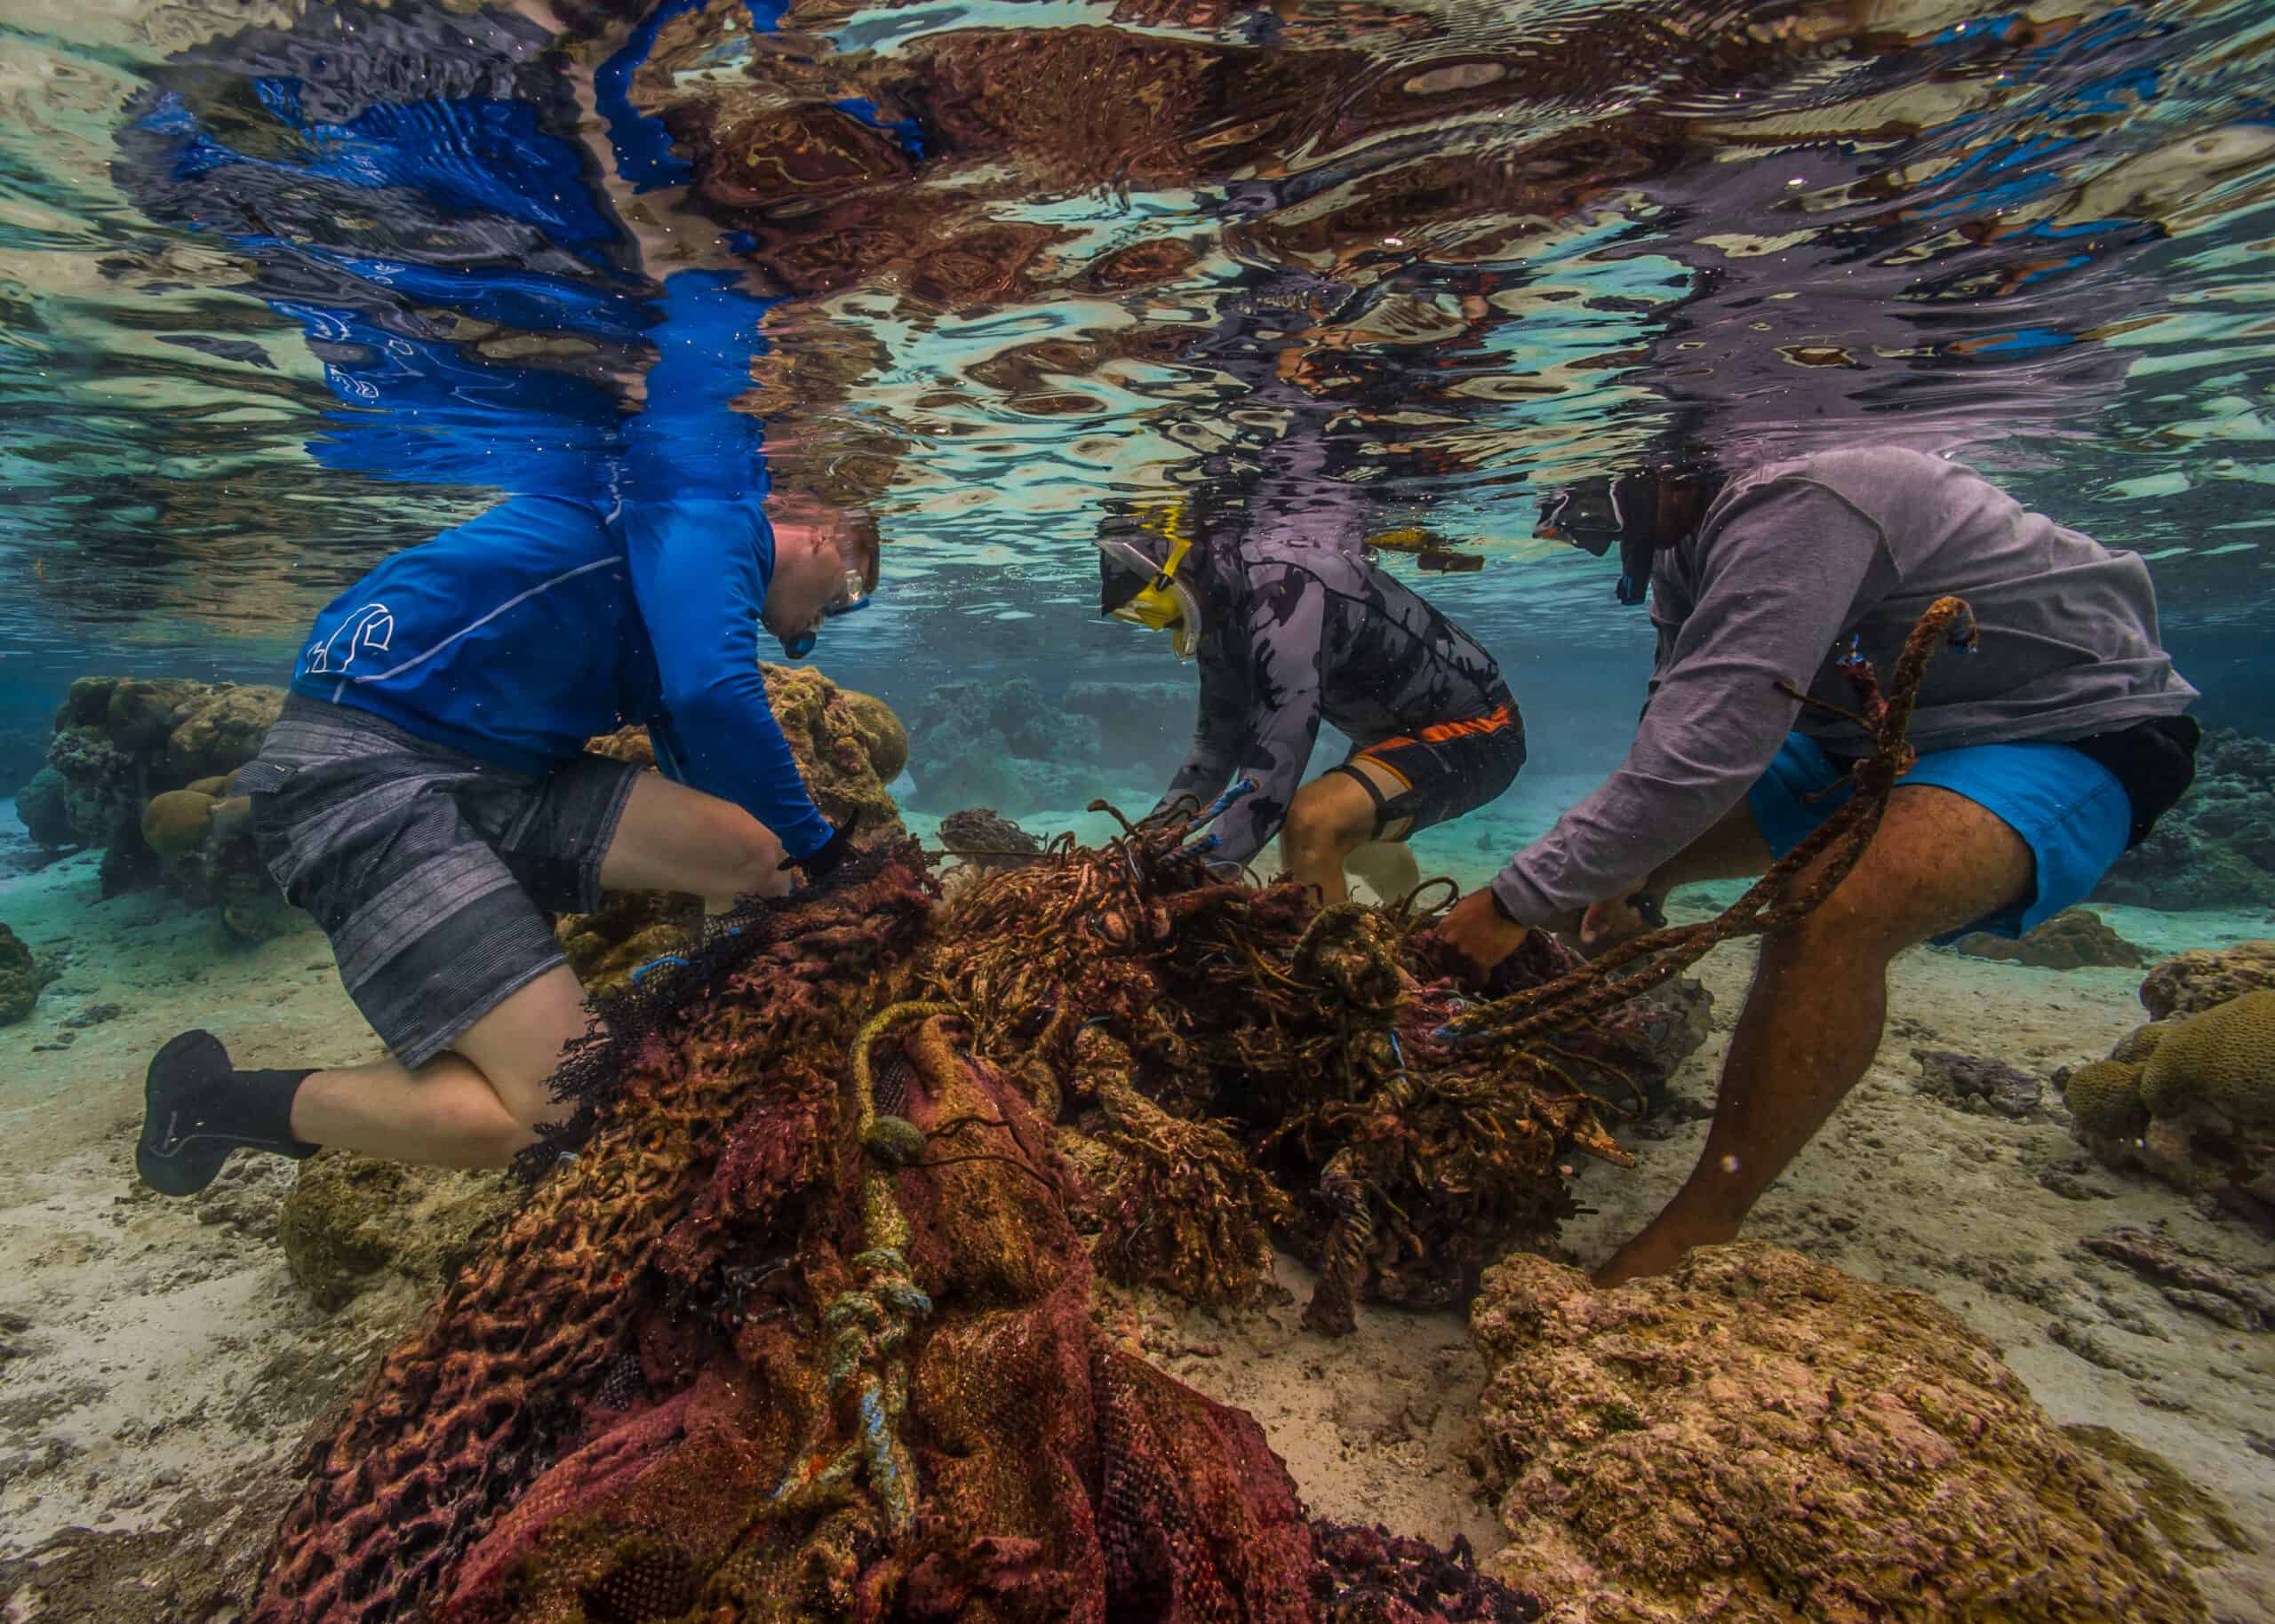 fishing gear entangled in coral reef